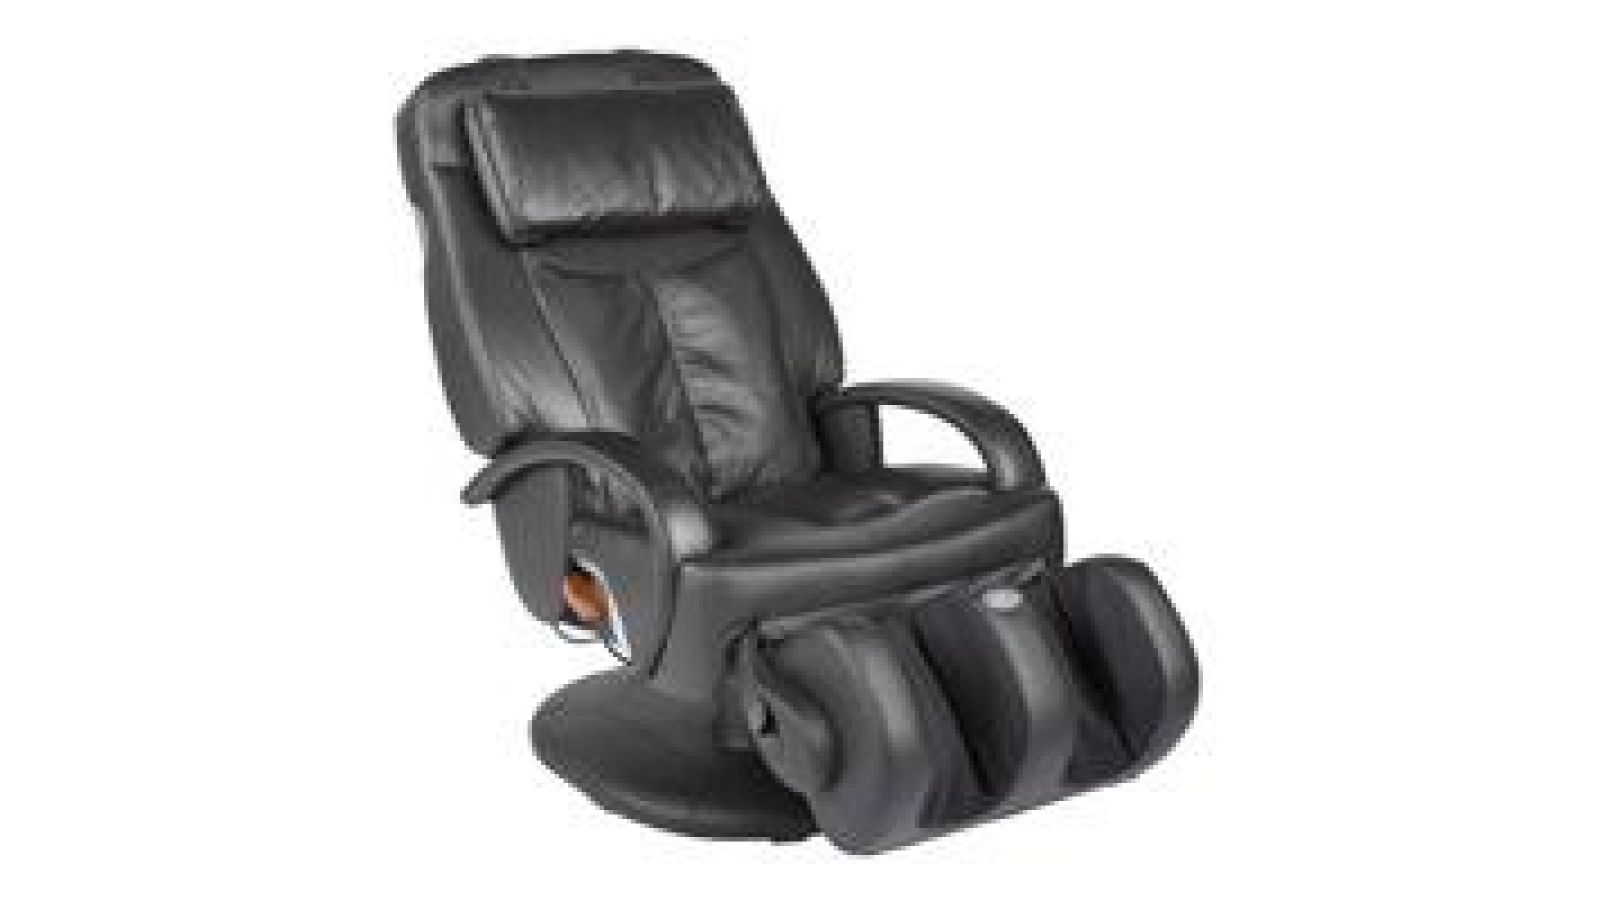 HT-7120 ThermoStretch Massage Chair